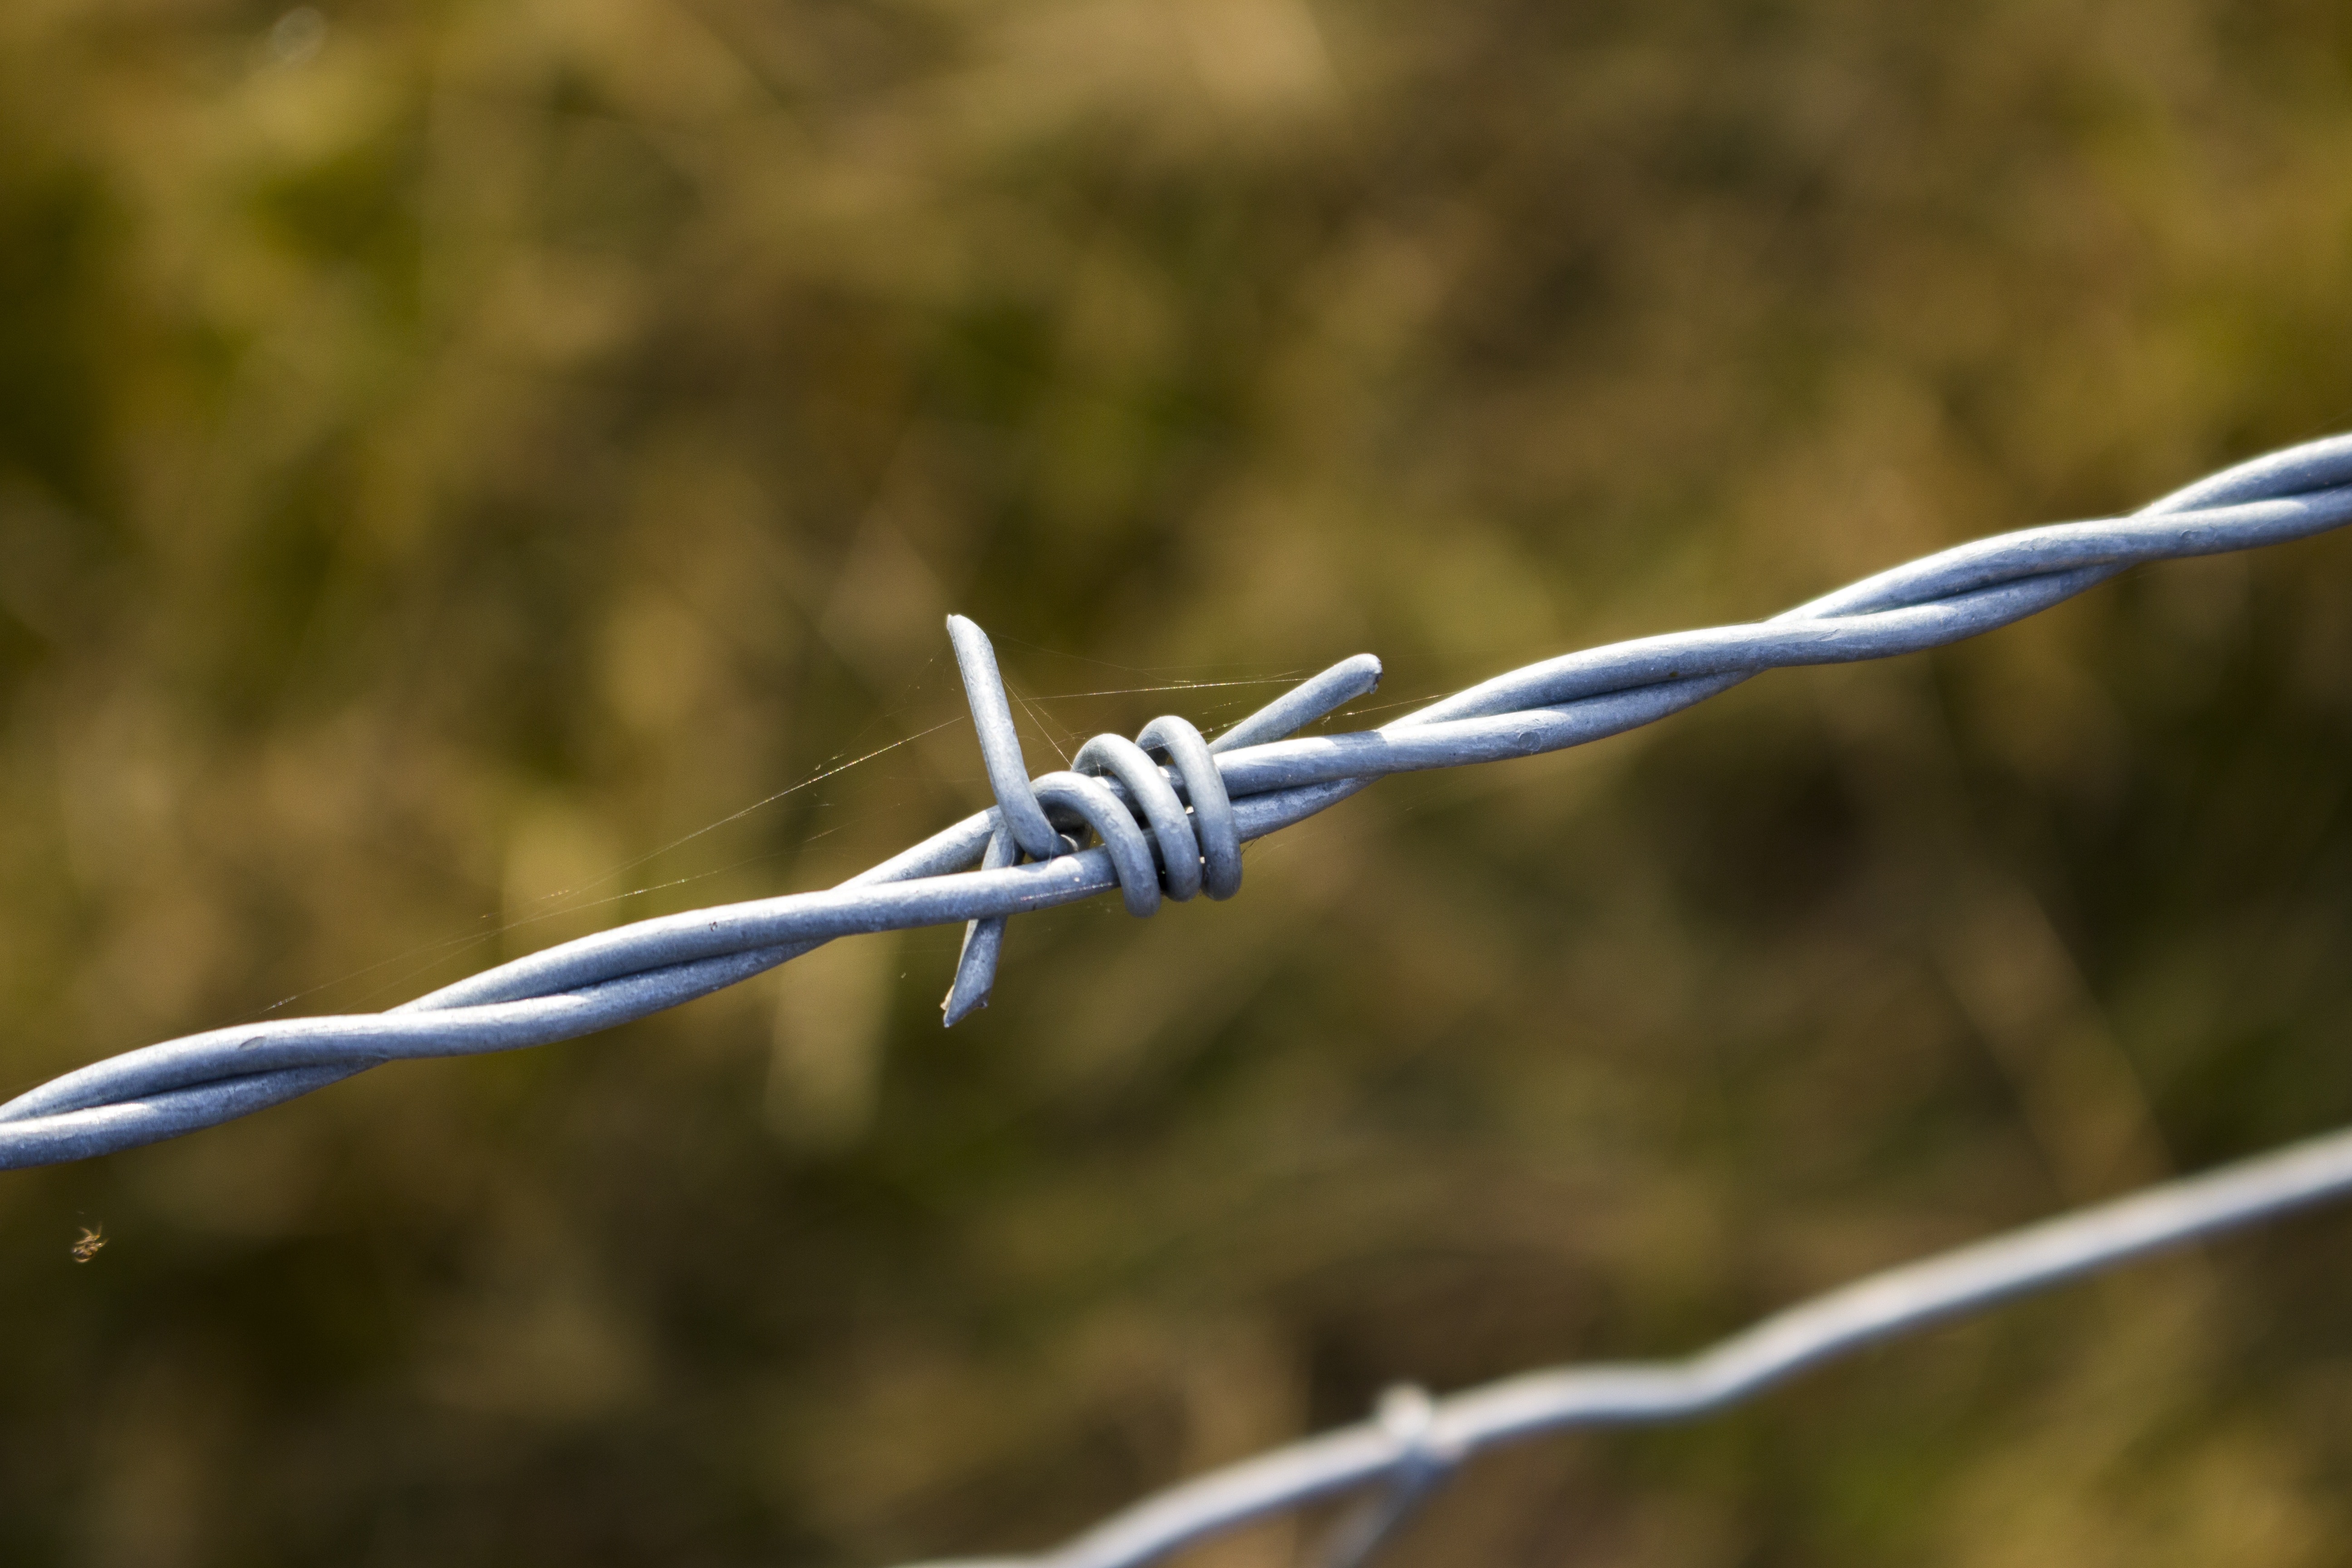 barb wire